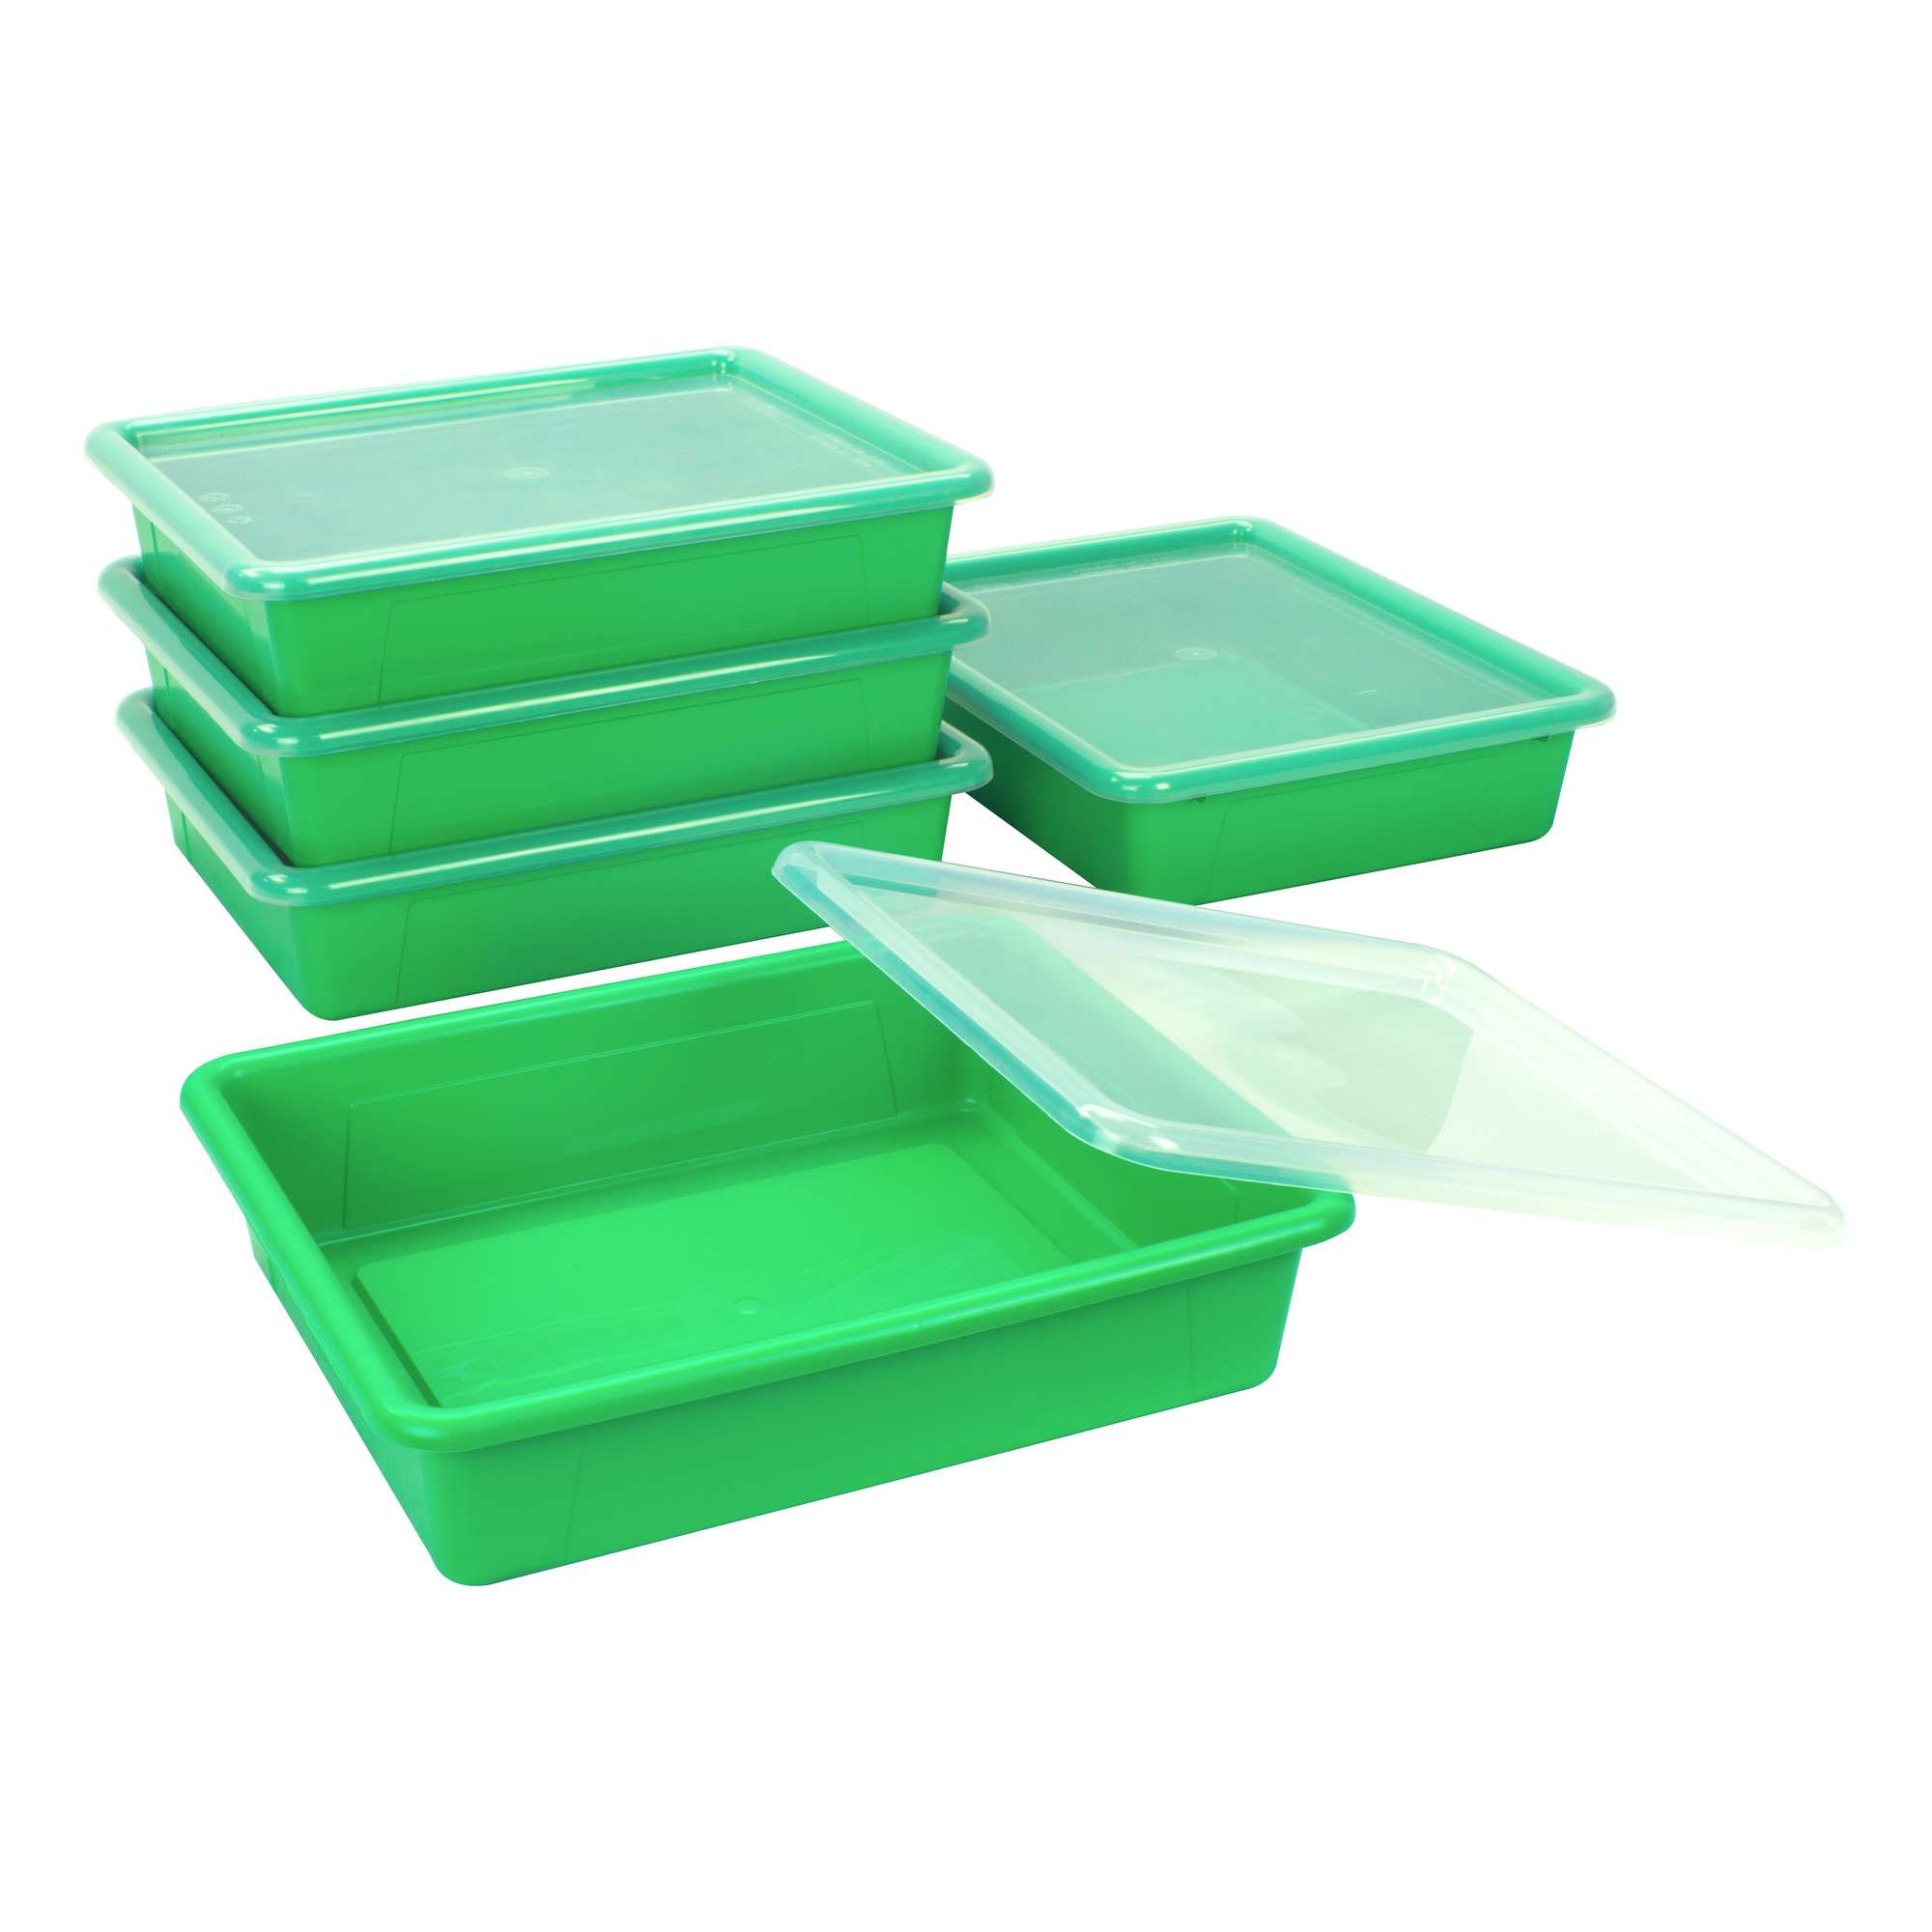 Storex Flat Storage Tray with Lid, Letter Size, 10 x 13 x 3 Inches, Green, 5-Pack